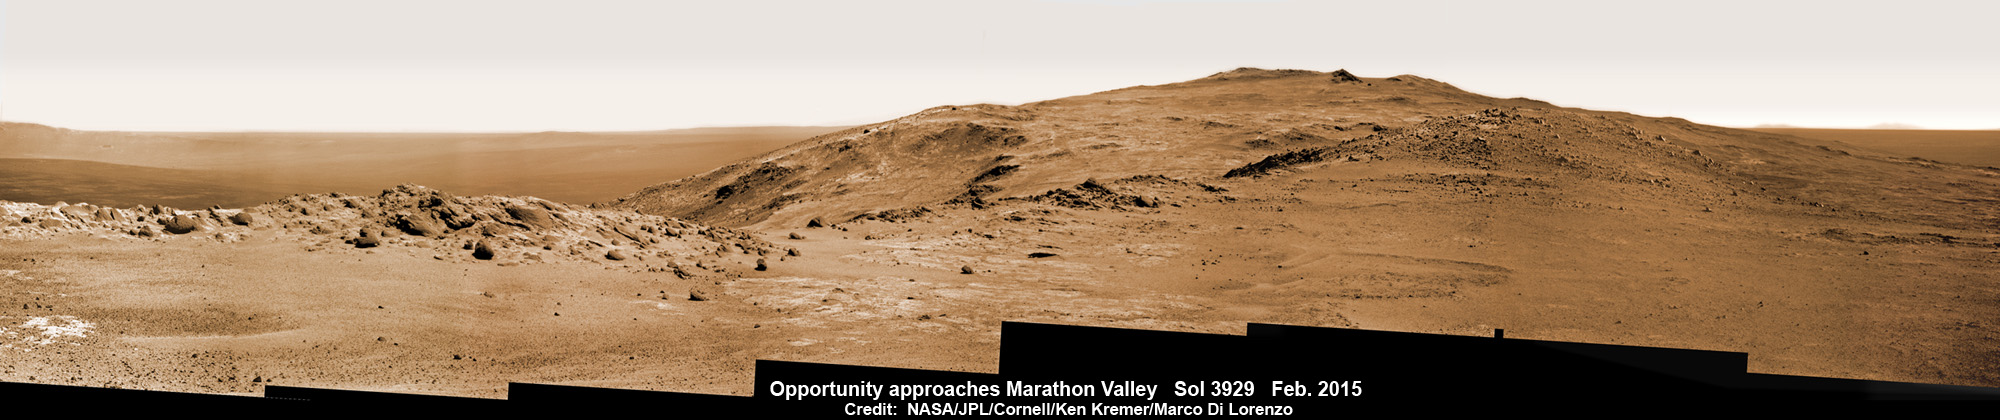 NASA Opportunity Rover looks ahead to Marathon Valley and Martian cliffs on Endeavour crater holding deposits of water altered clay minerals science treasure on Feb. 11, 2015.  Rover operates well after 11 Years trekking Mars.   This pancam camera photo mosaic was assembled from images taken on Sol 3929 (Feb. 11, 2015) and colorized.  Credit: NASA/JPL/Cornell/Ken Kremer/kenkremer.com/Marco Di Lorenzo